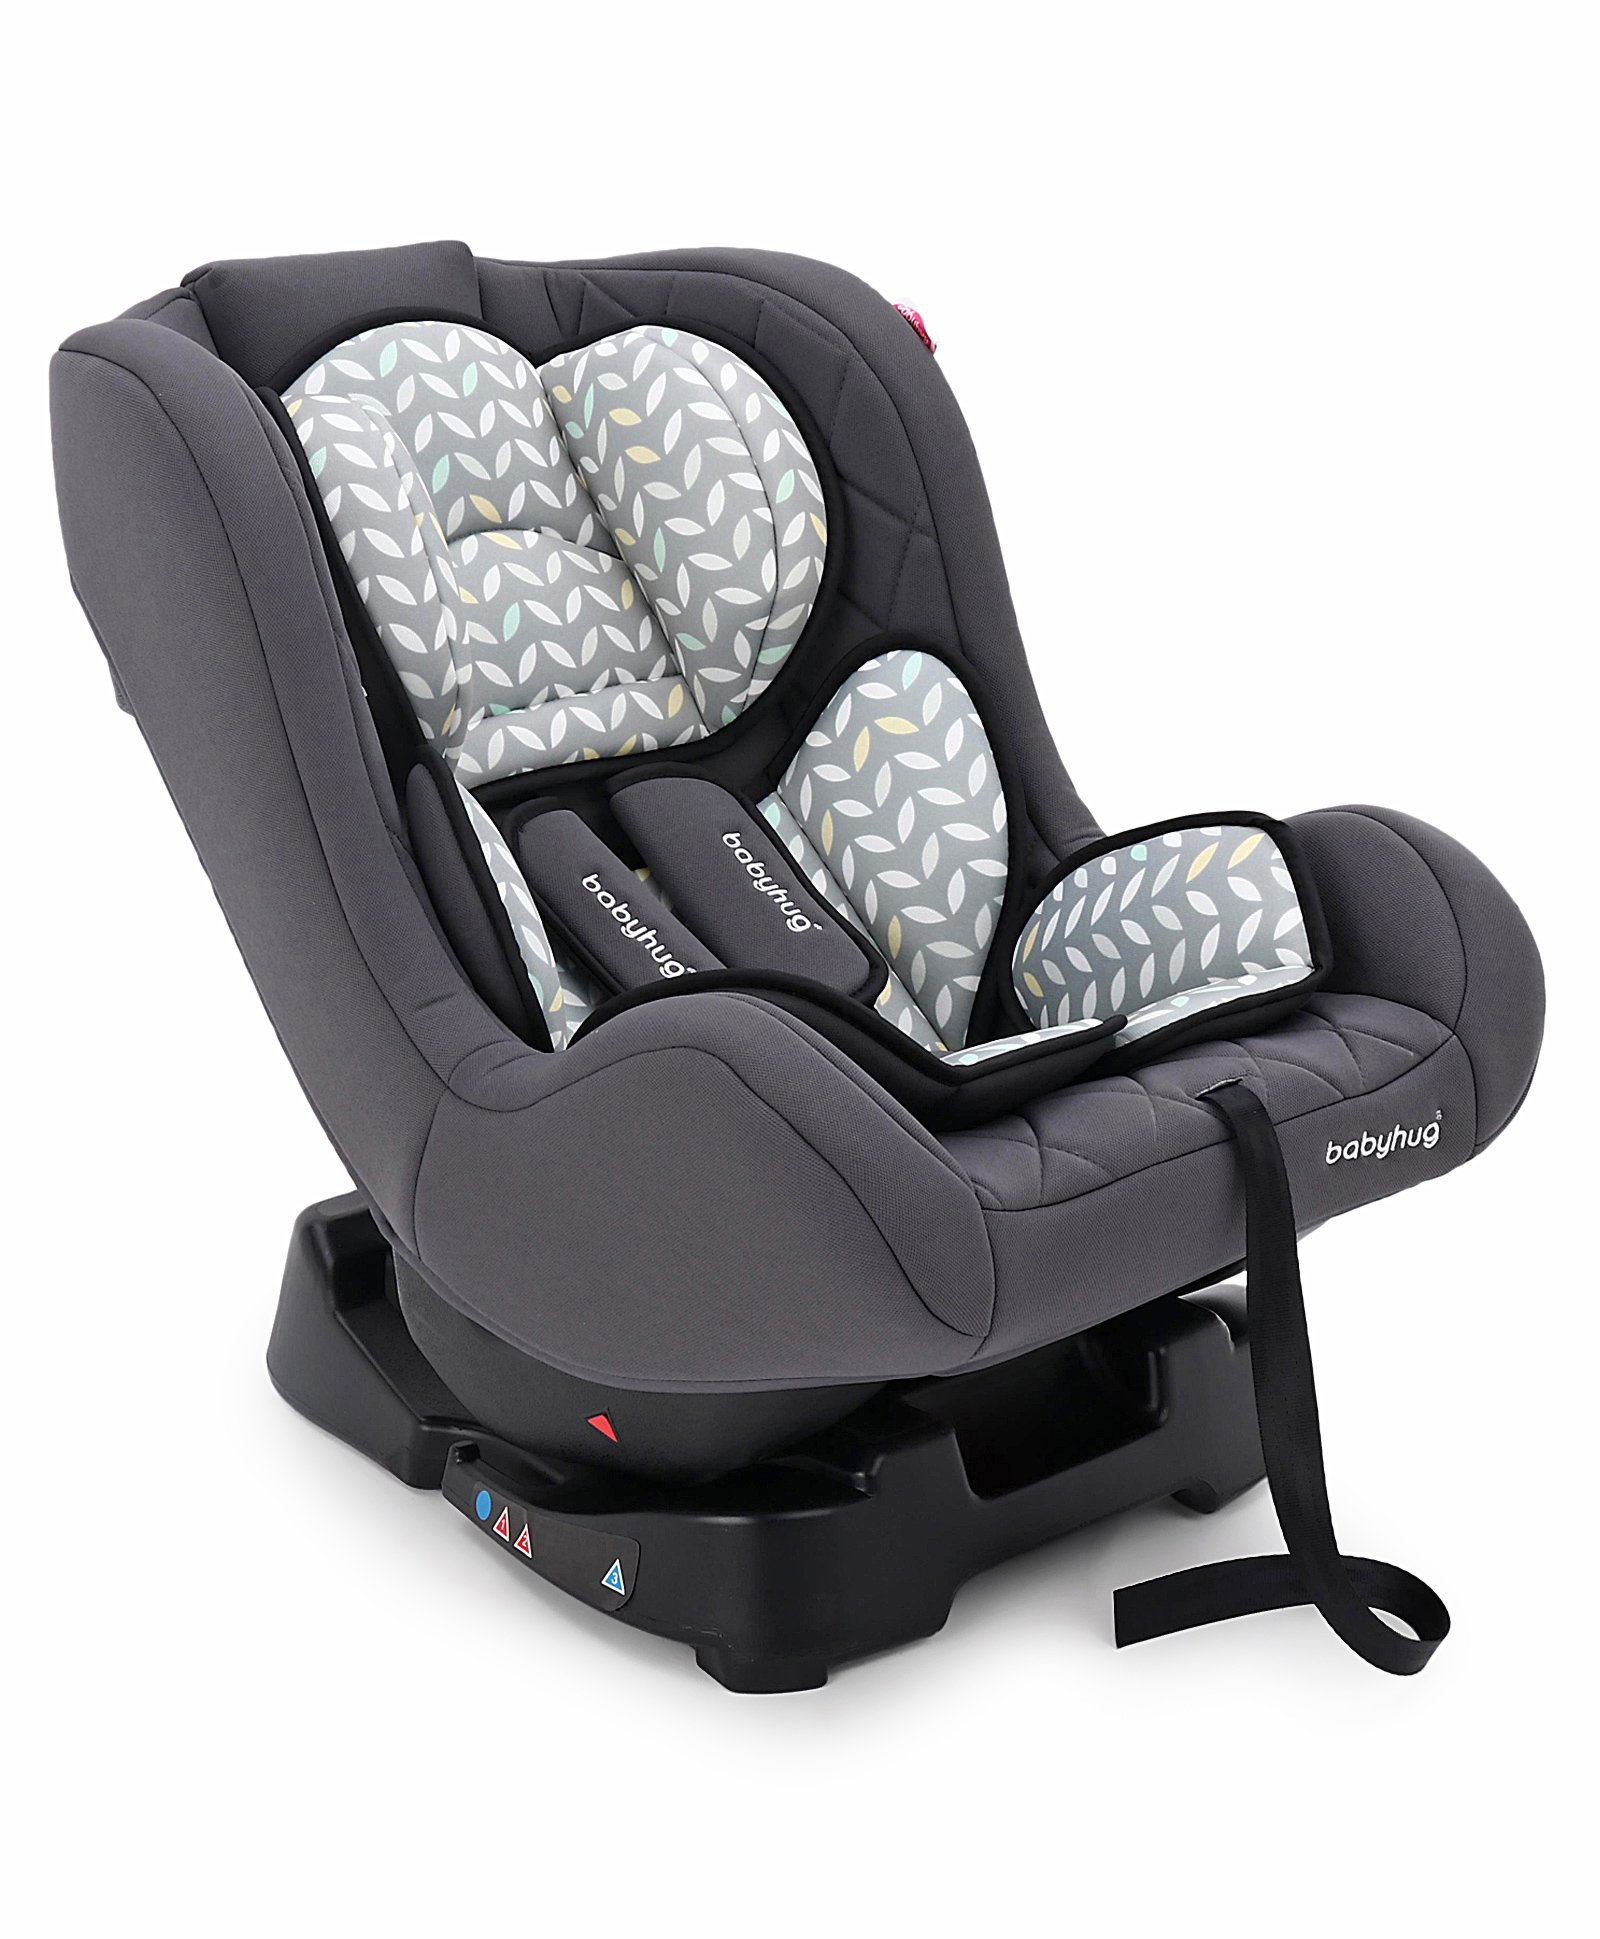 babyhug-expedition-3-in-1-convertible-car-seat